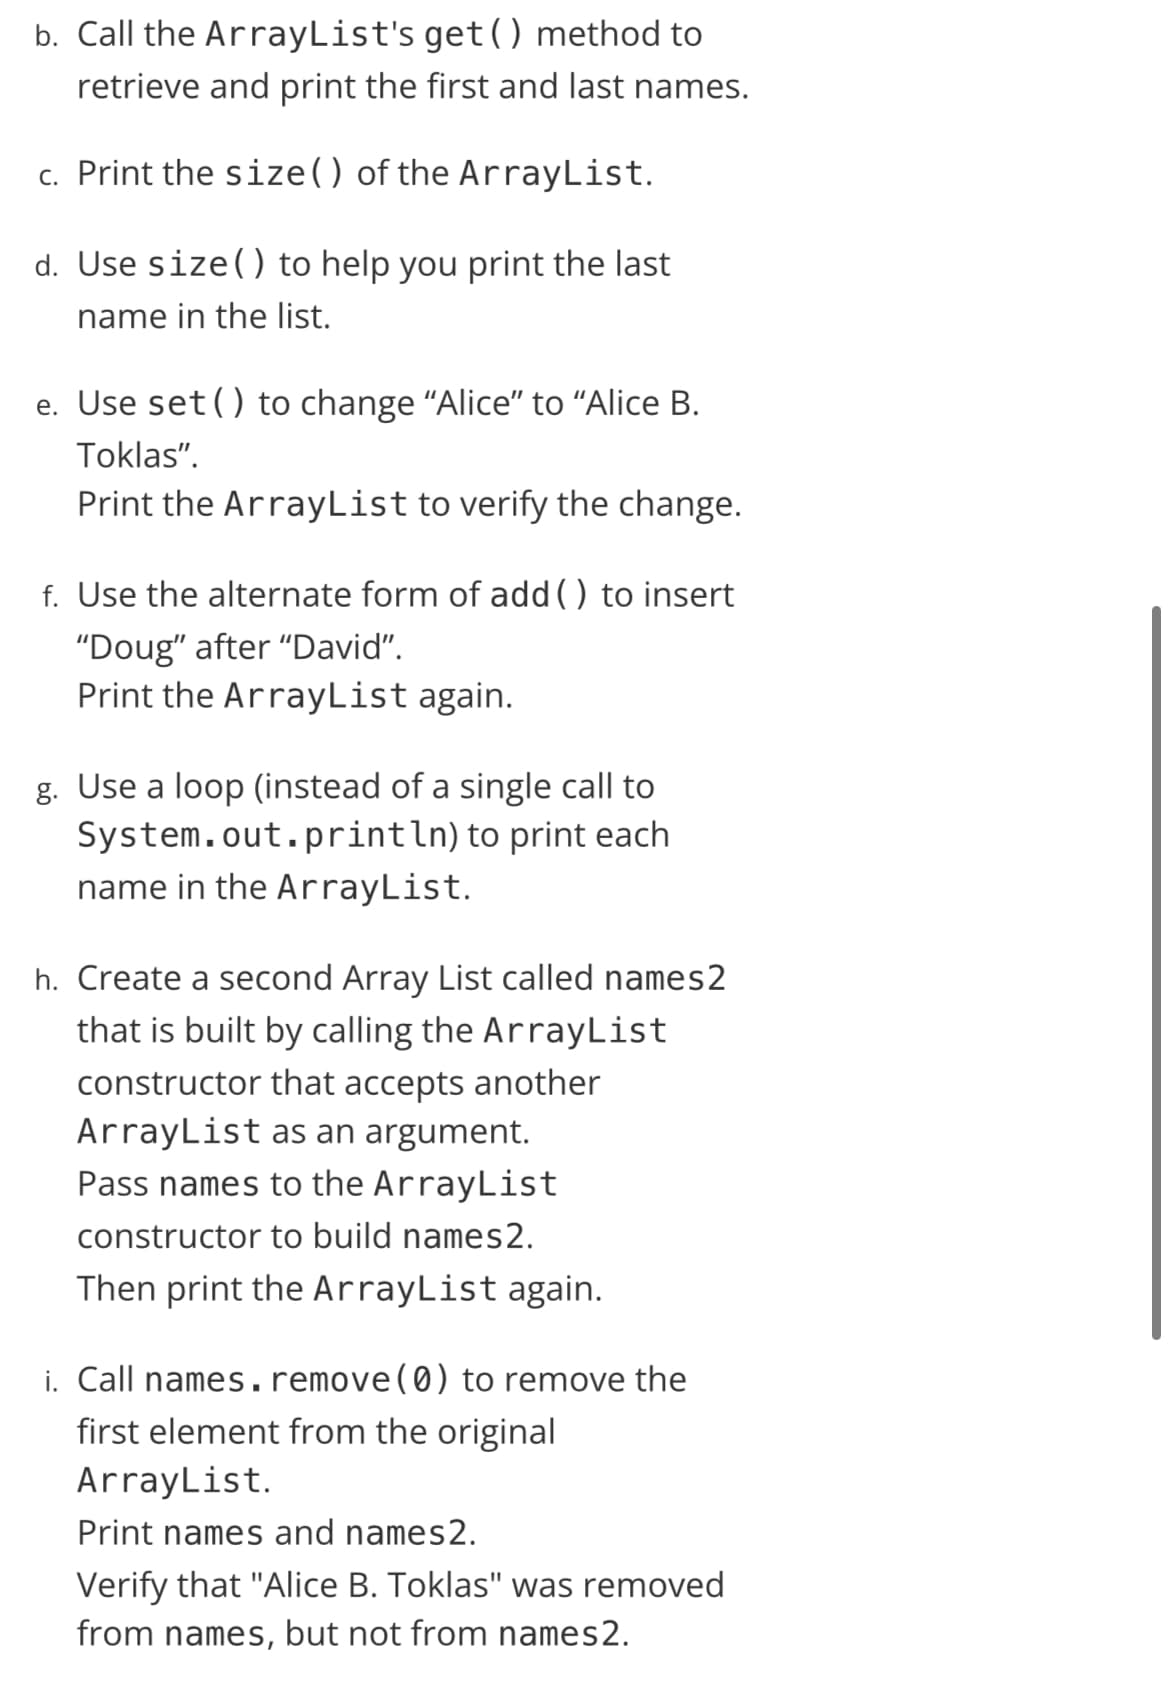 b. Call the ArrayList's get() method to
retrieve and print the first and last names.
c. Print the size() of the ArrayList.
d. Use size() to help you print the last
name in the list.
e. Use set() to change "Alice" to "Alice B.
Toklas".
Print the ArrayList to verify the change.
f. Use the alternate form of add () to insert
"Doug" after "David".
Print the ArrayList again.
g. Use a loop (instead of a single call to
System.out.println) to print each
name in the ArrayList.
h. Create a second Array List called names2
that is built by calling the ArrayList
constructor that accepts another
ArrayList as an argument.
Pass names to the ArrayList
constructor to build names2.
Then print the ArrayList again.
i. Call names. remove(0) to remove the
first element from the original
ArrayList.
Print names and names2.
Verify that "Alice B. Toklas" was removed
from names, but not from names2.
